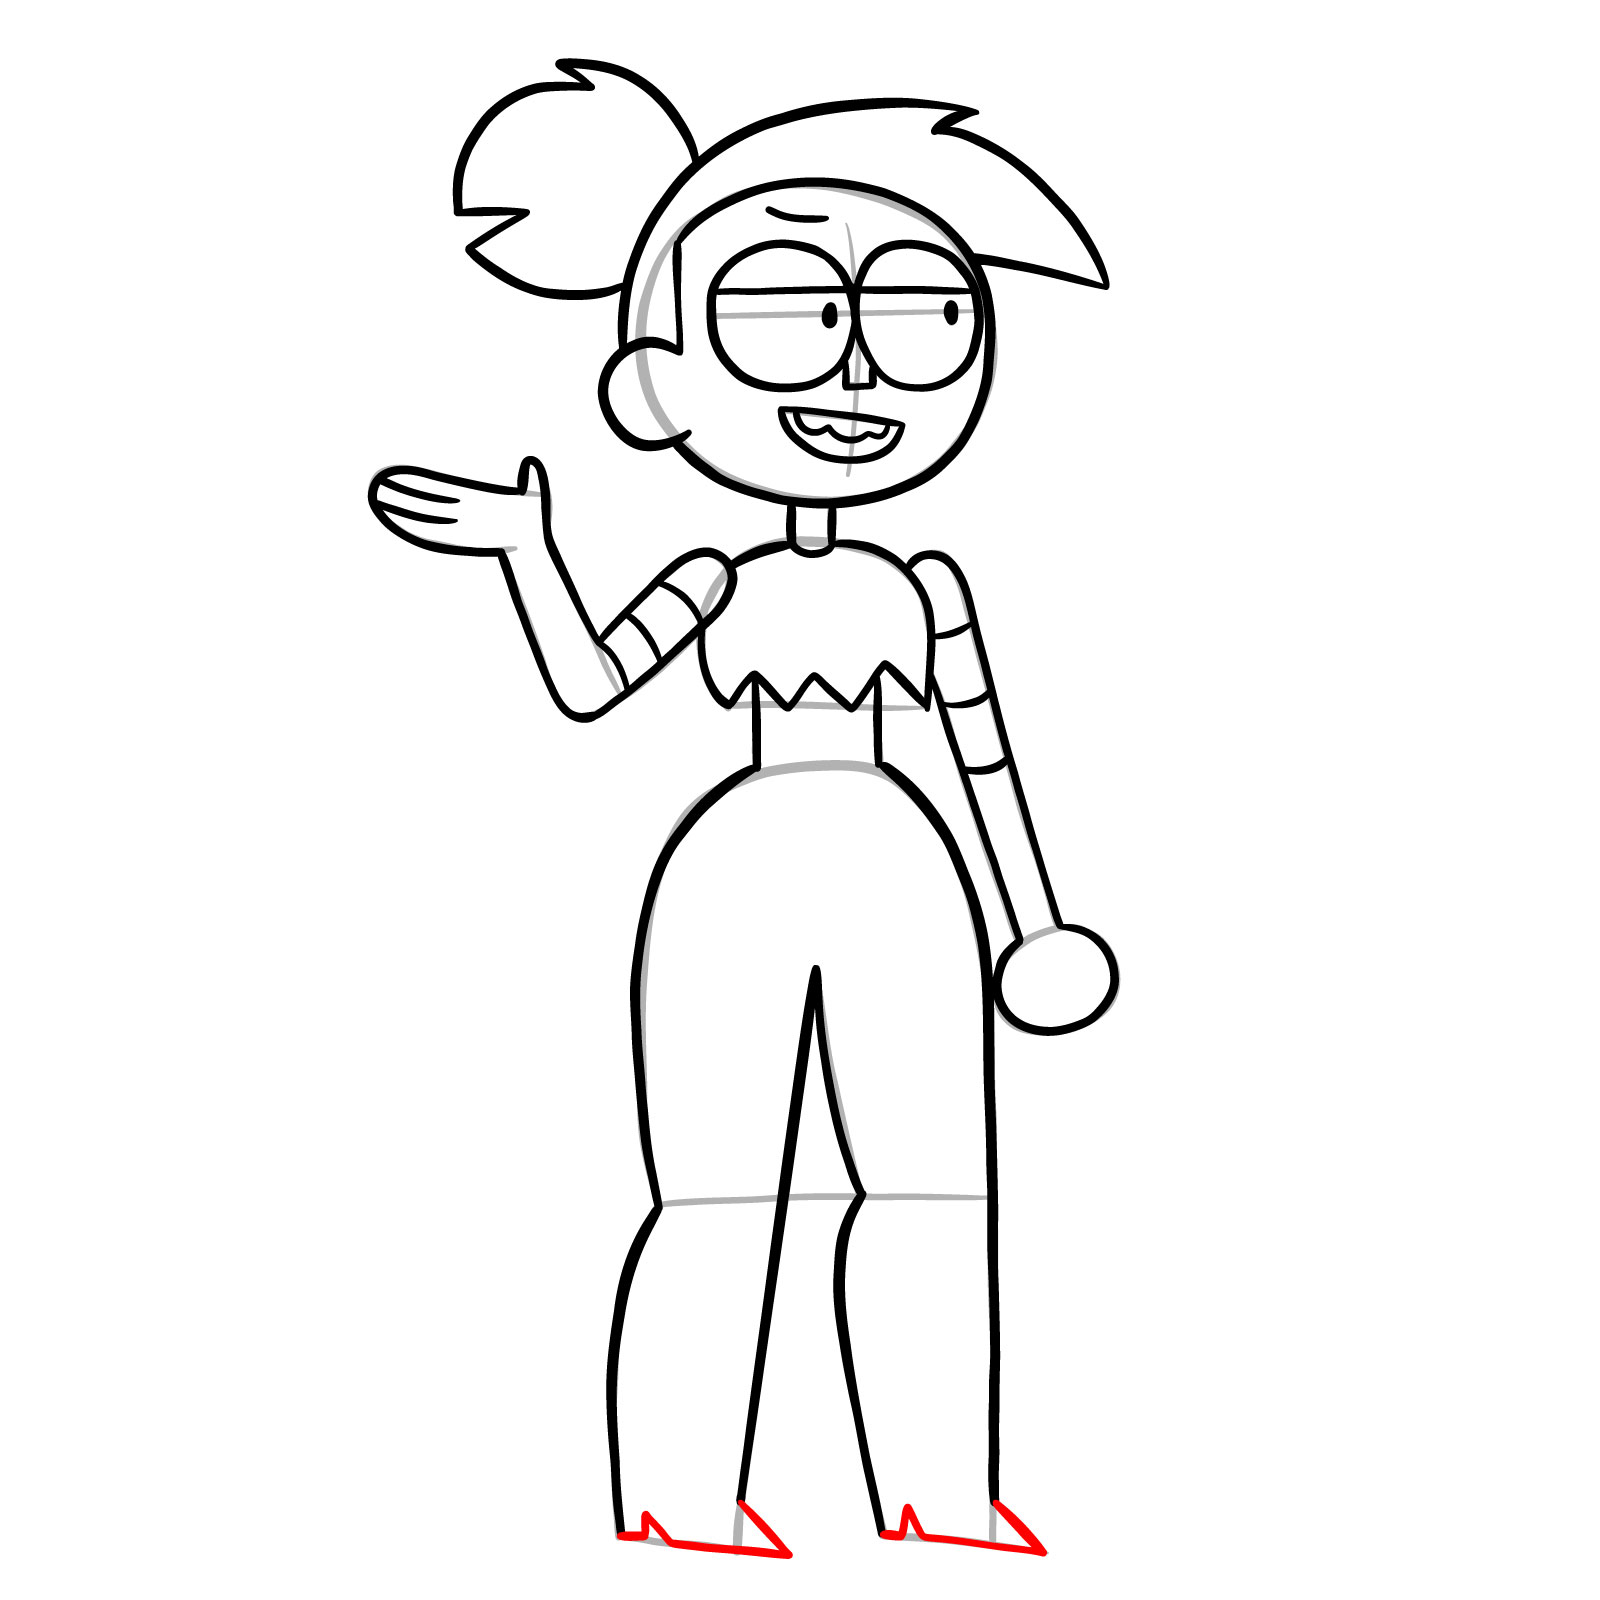 How to draw Enid Mettle from OK K.O.! - step 22